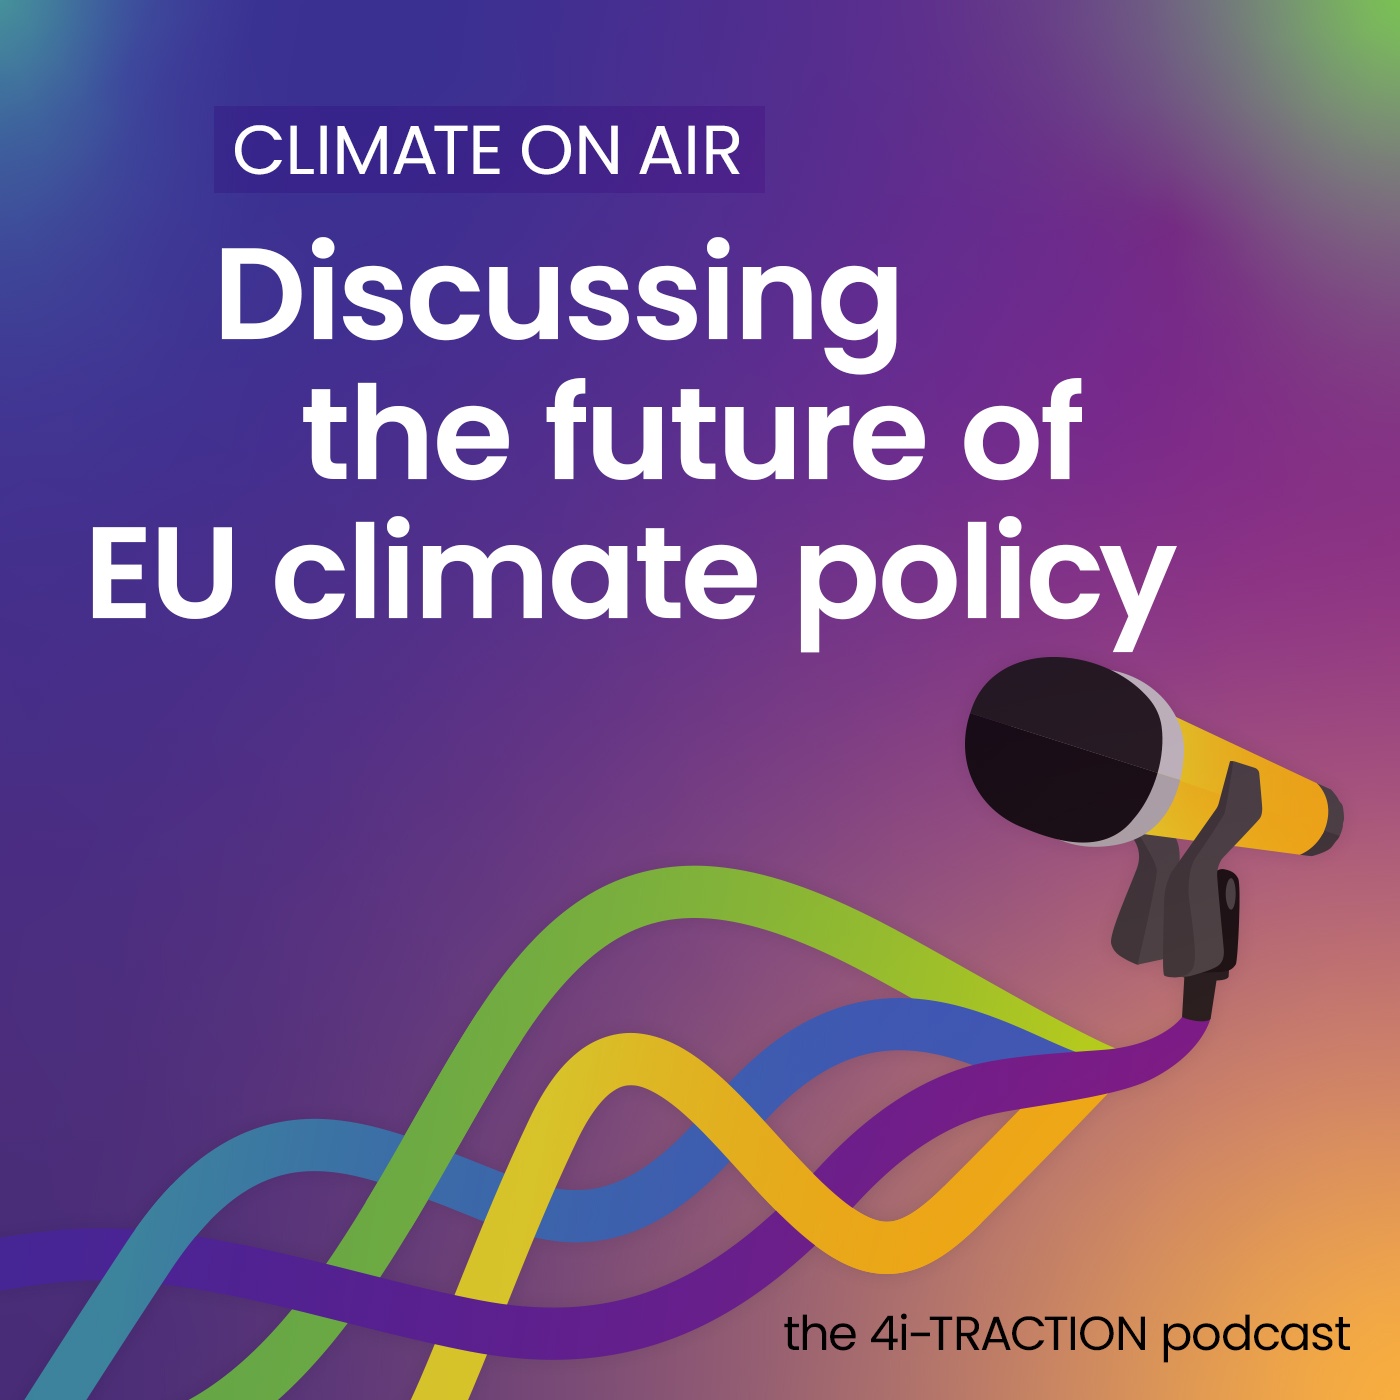 CLIMATE ON AIR – Discussing the future of EU climate policy